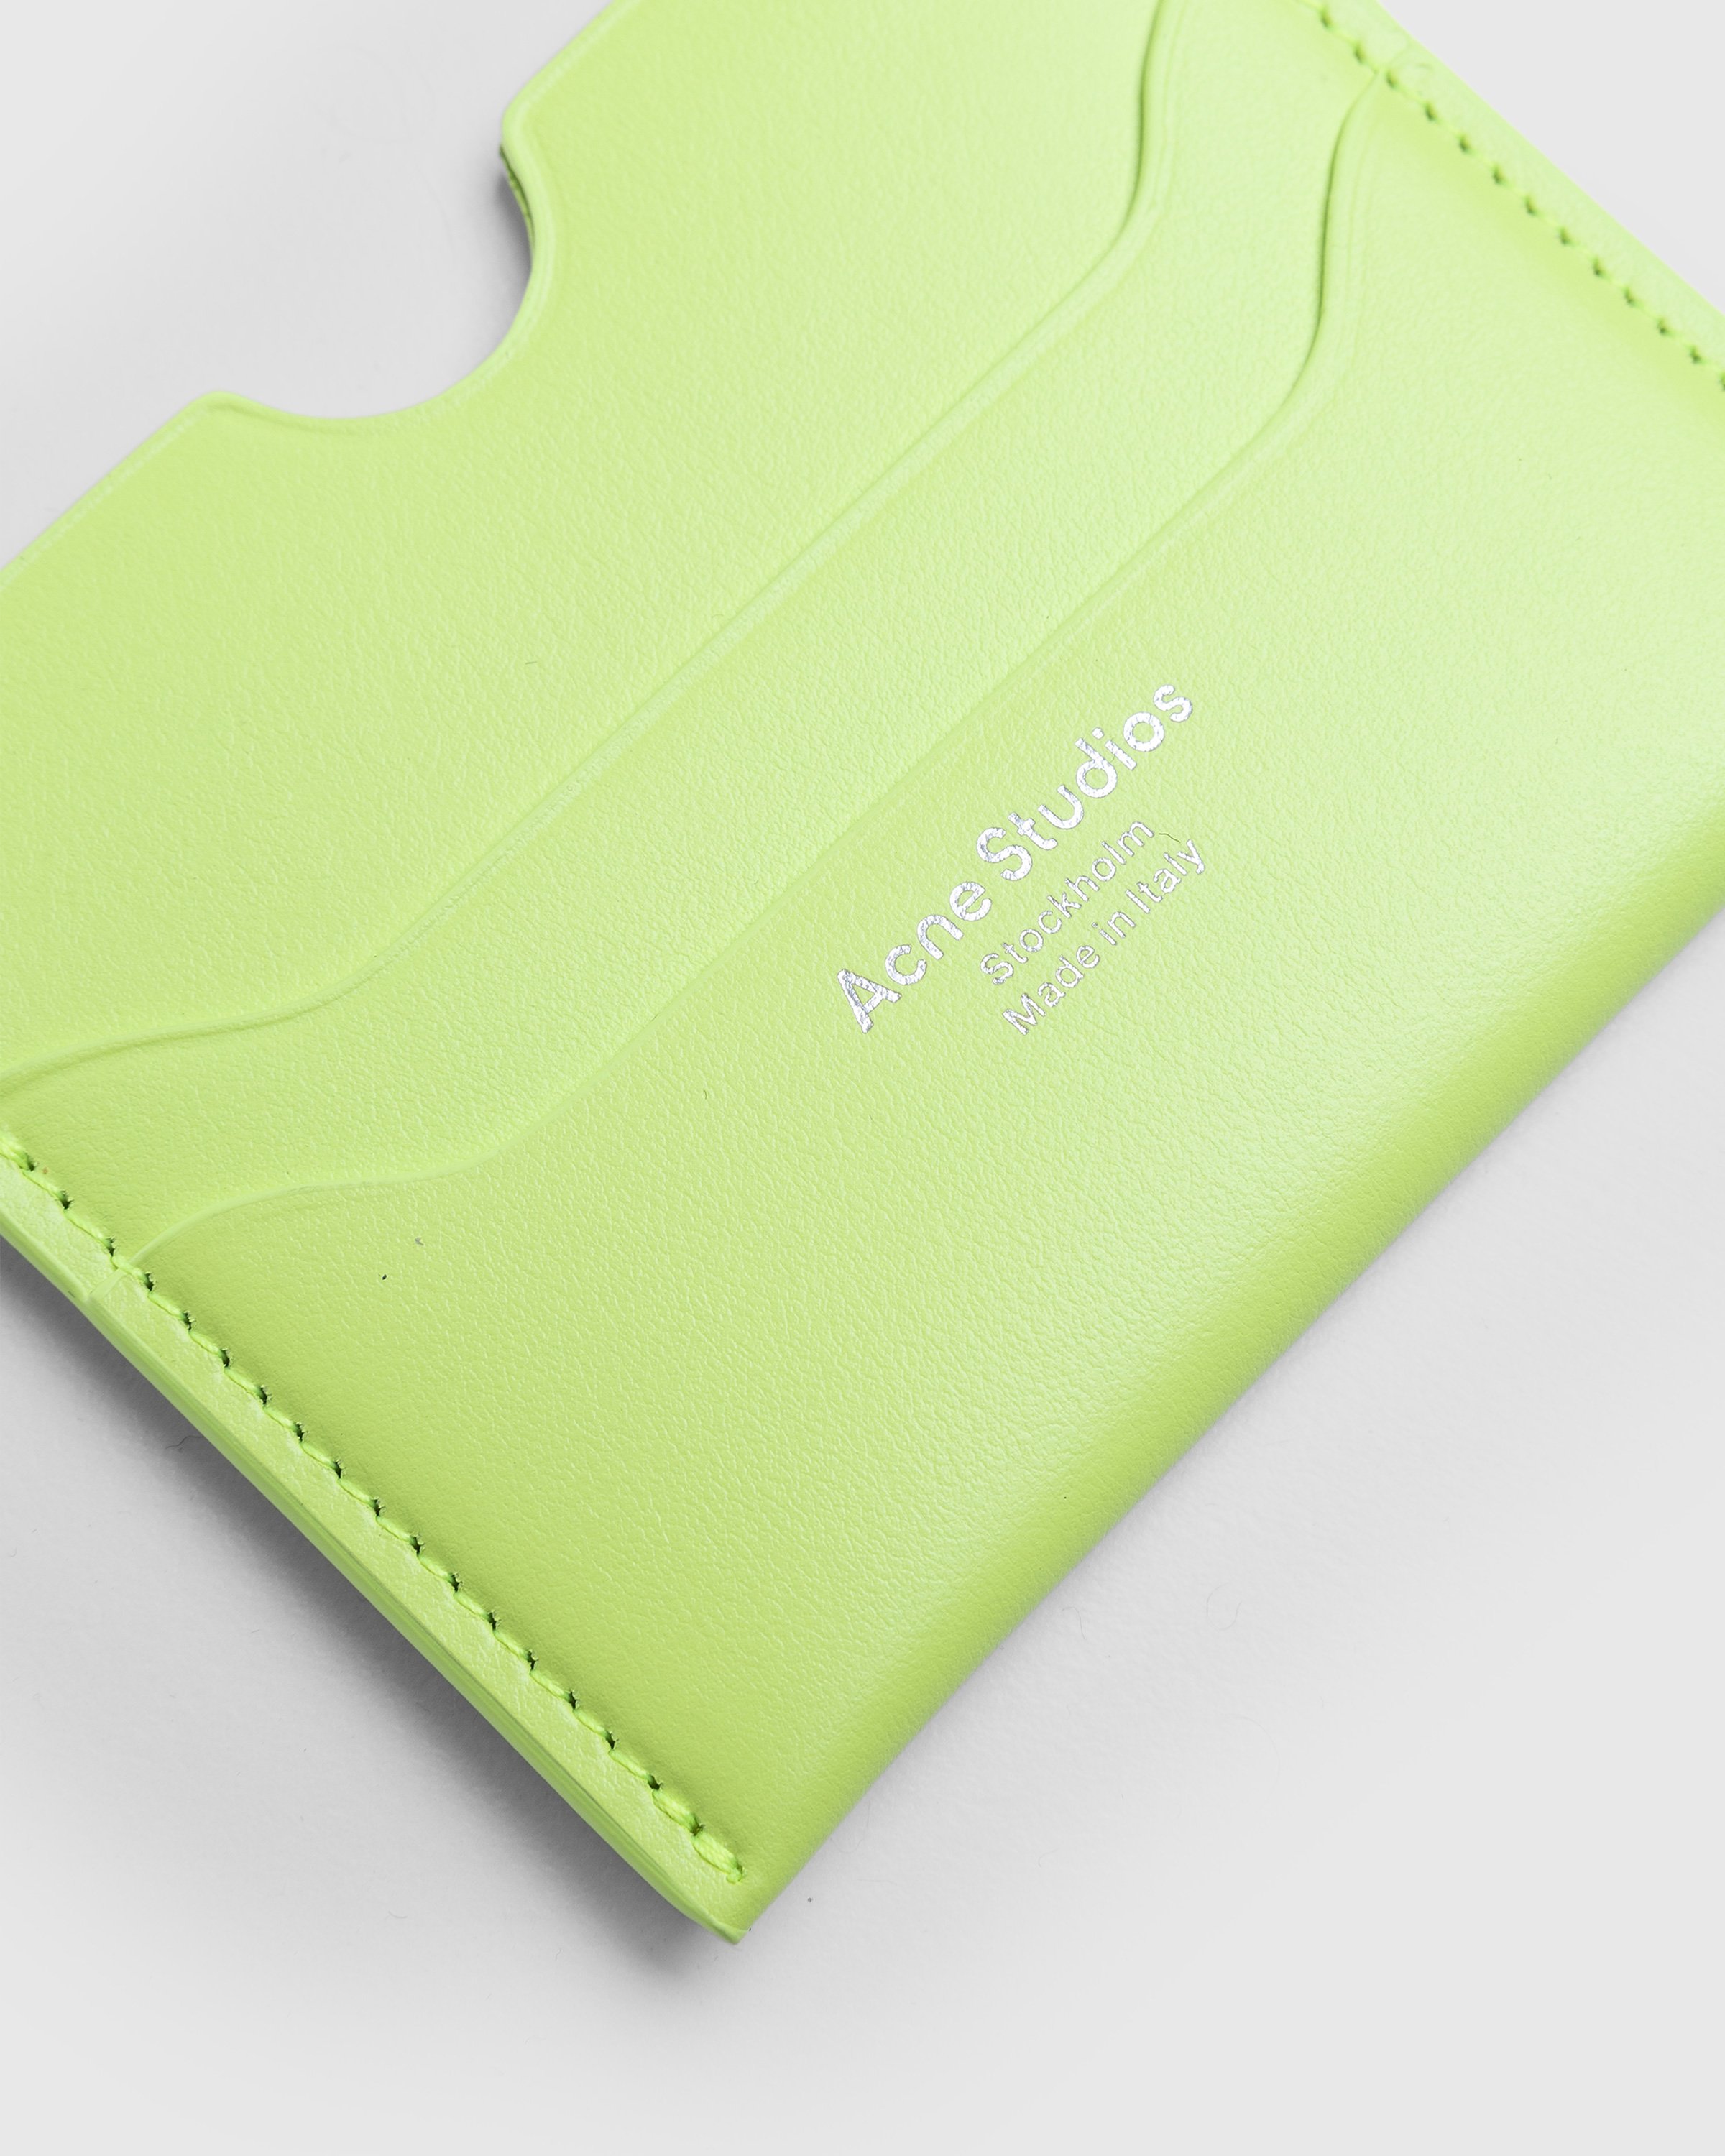 Acne Studios - Leather Card Holder Lime Green - Accessories - Green - Image 3